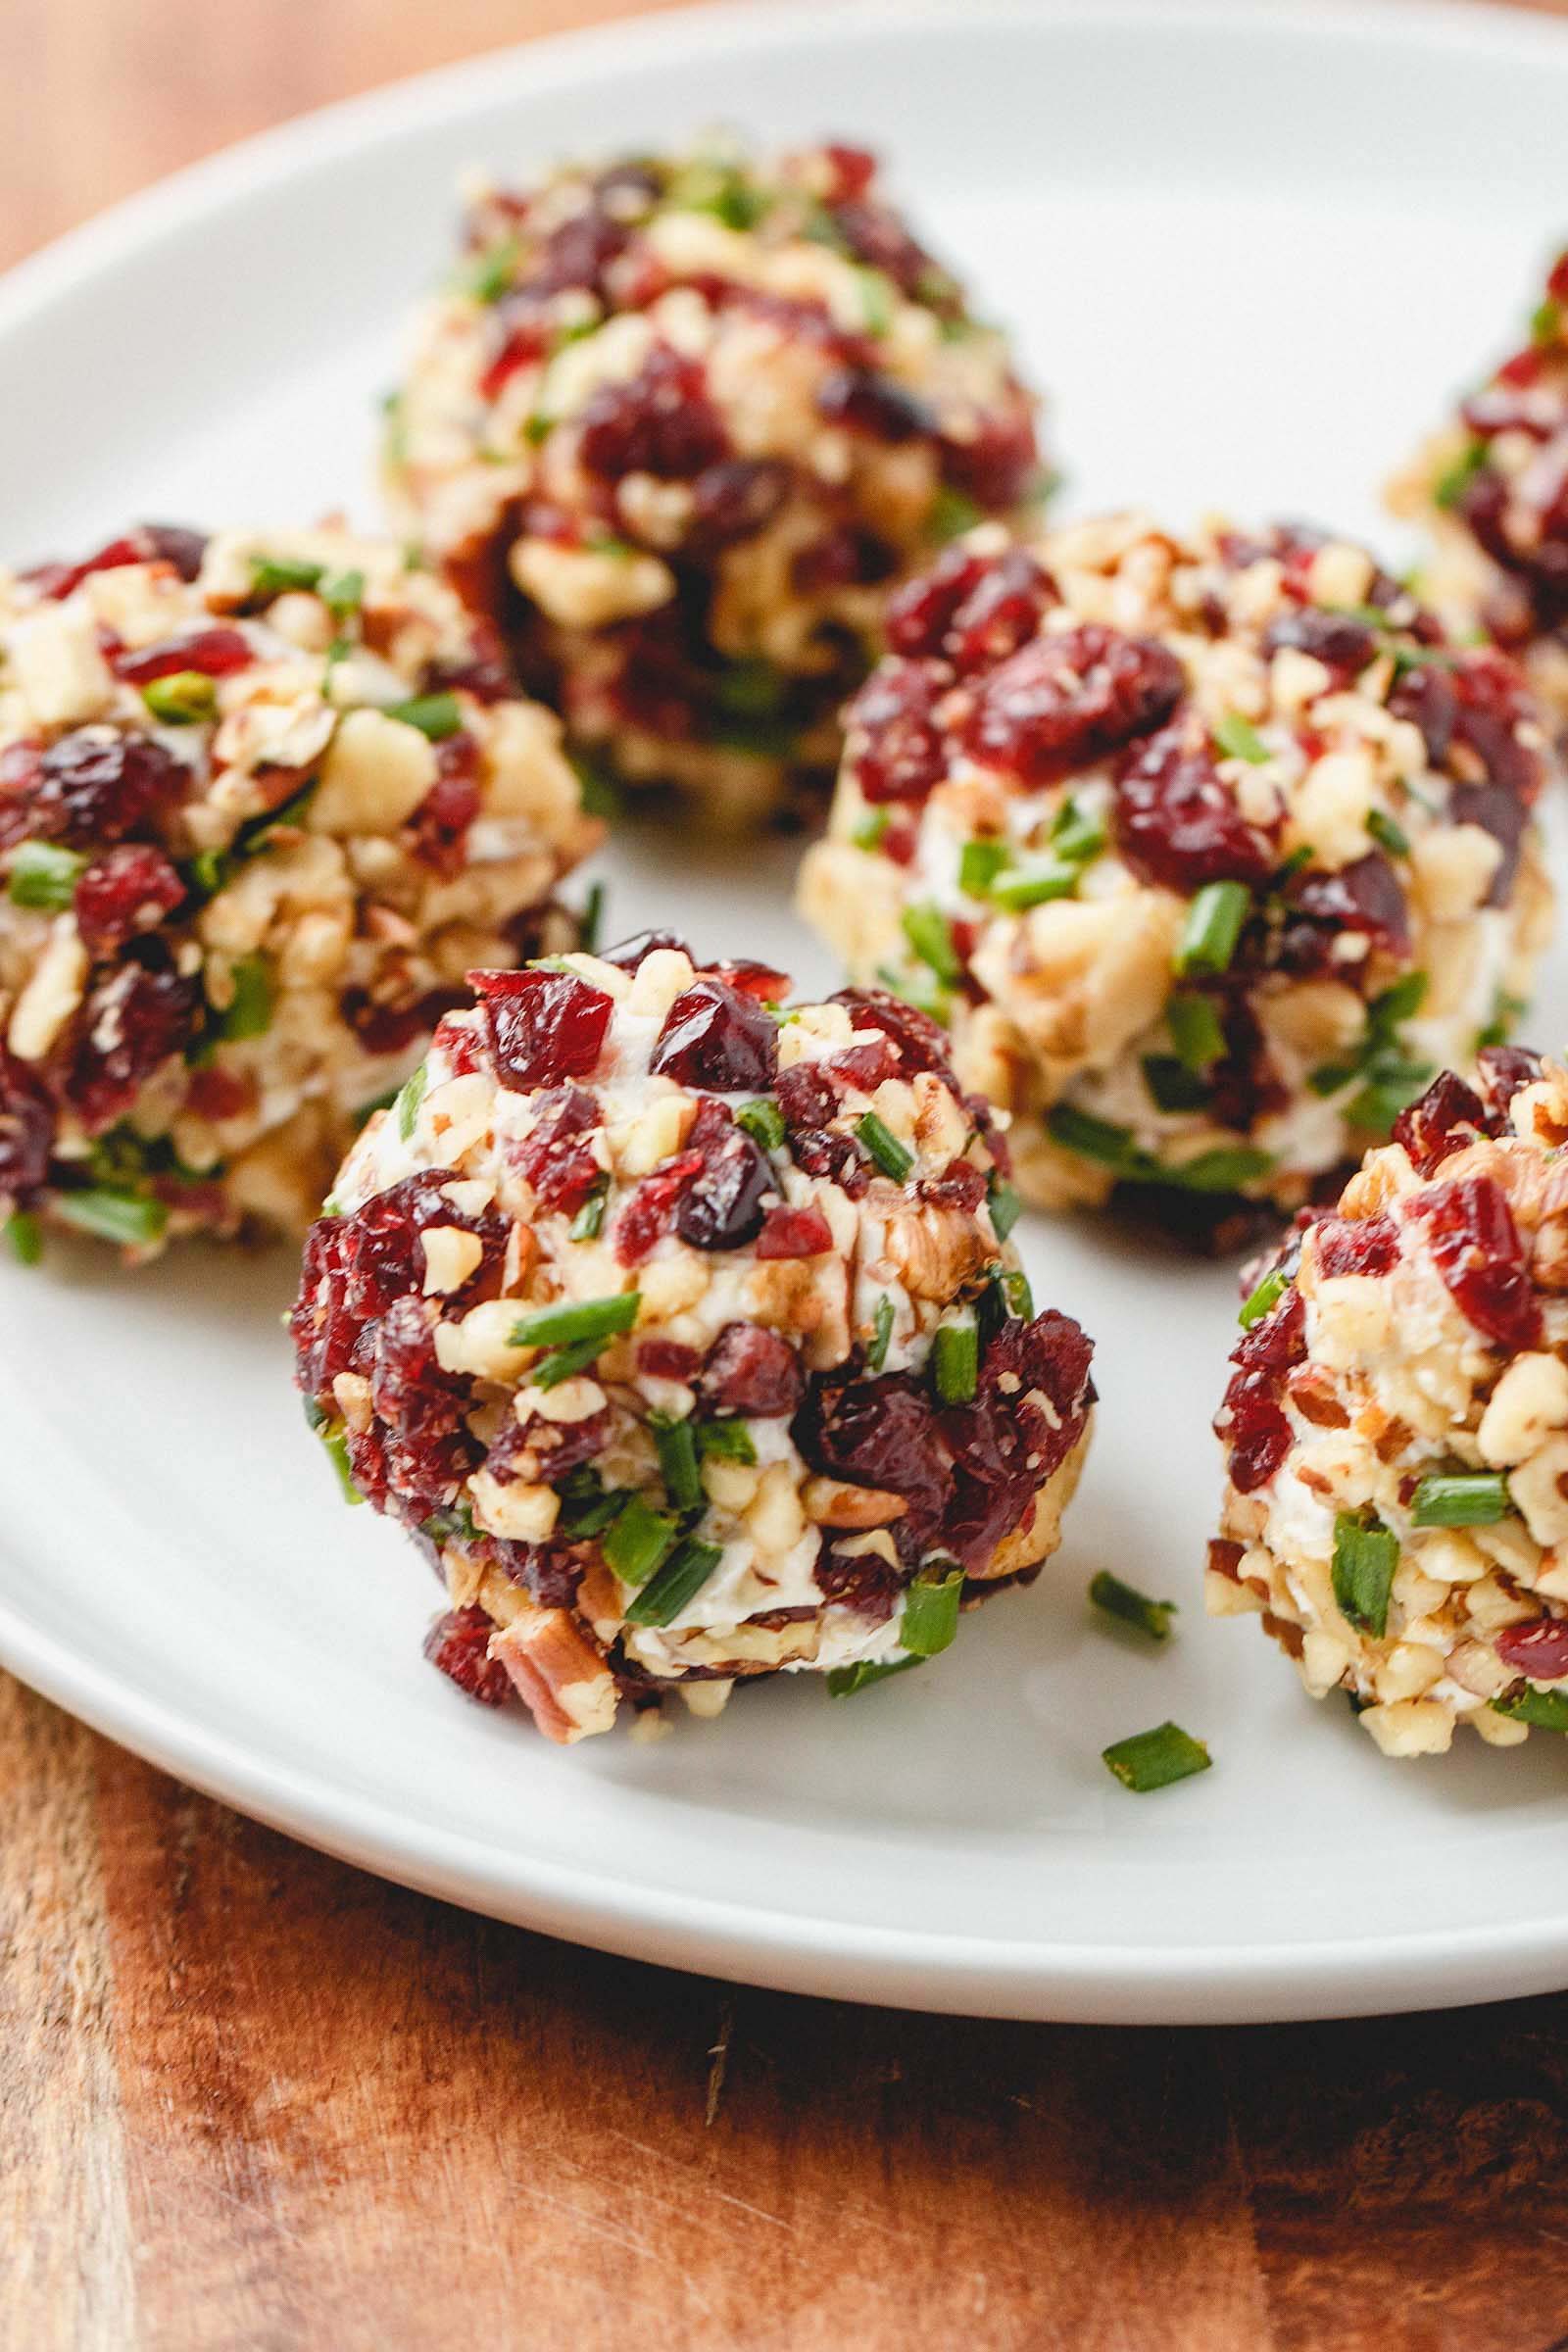 Cranberry Nut Cream Cheese Balls - These super festive cheese balls won't last long on your table - definitely a crowd pleaser!